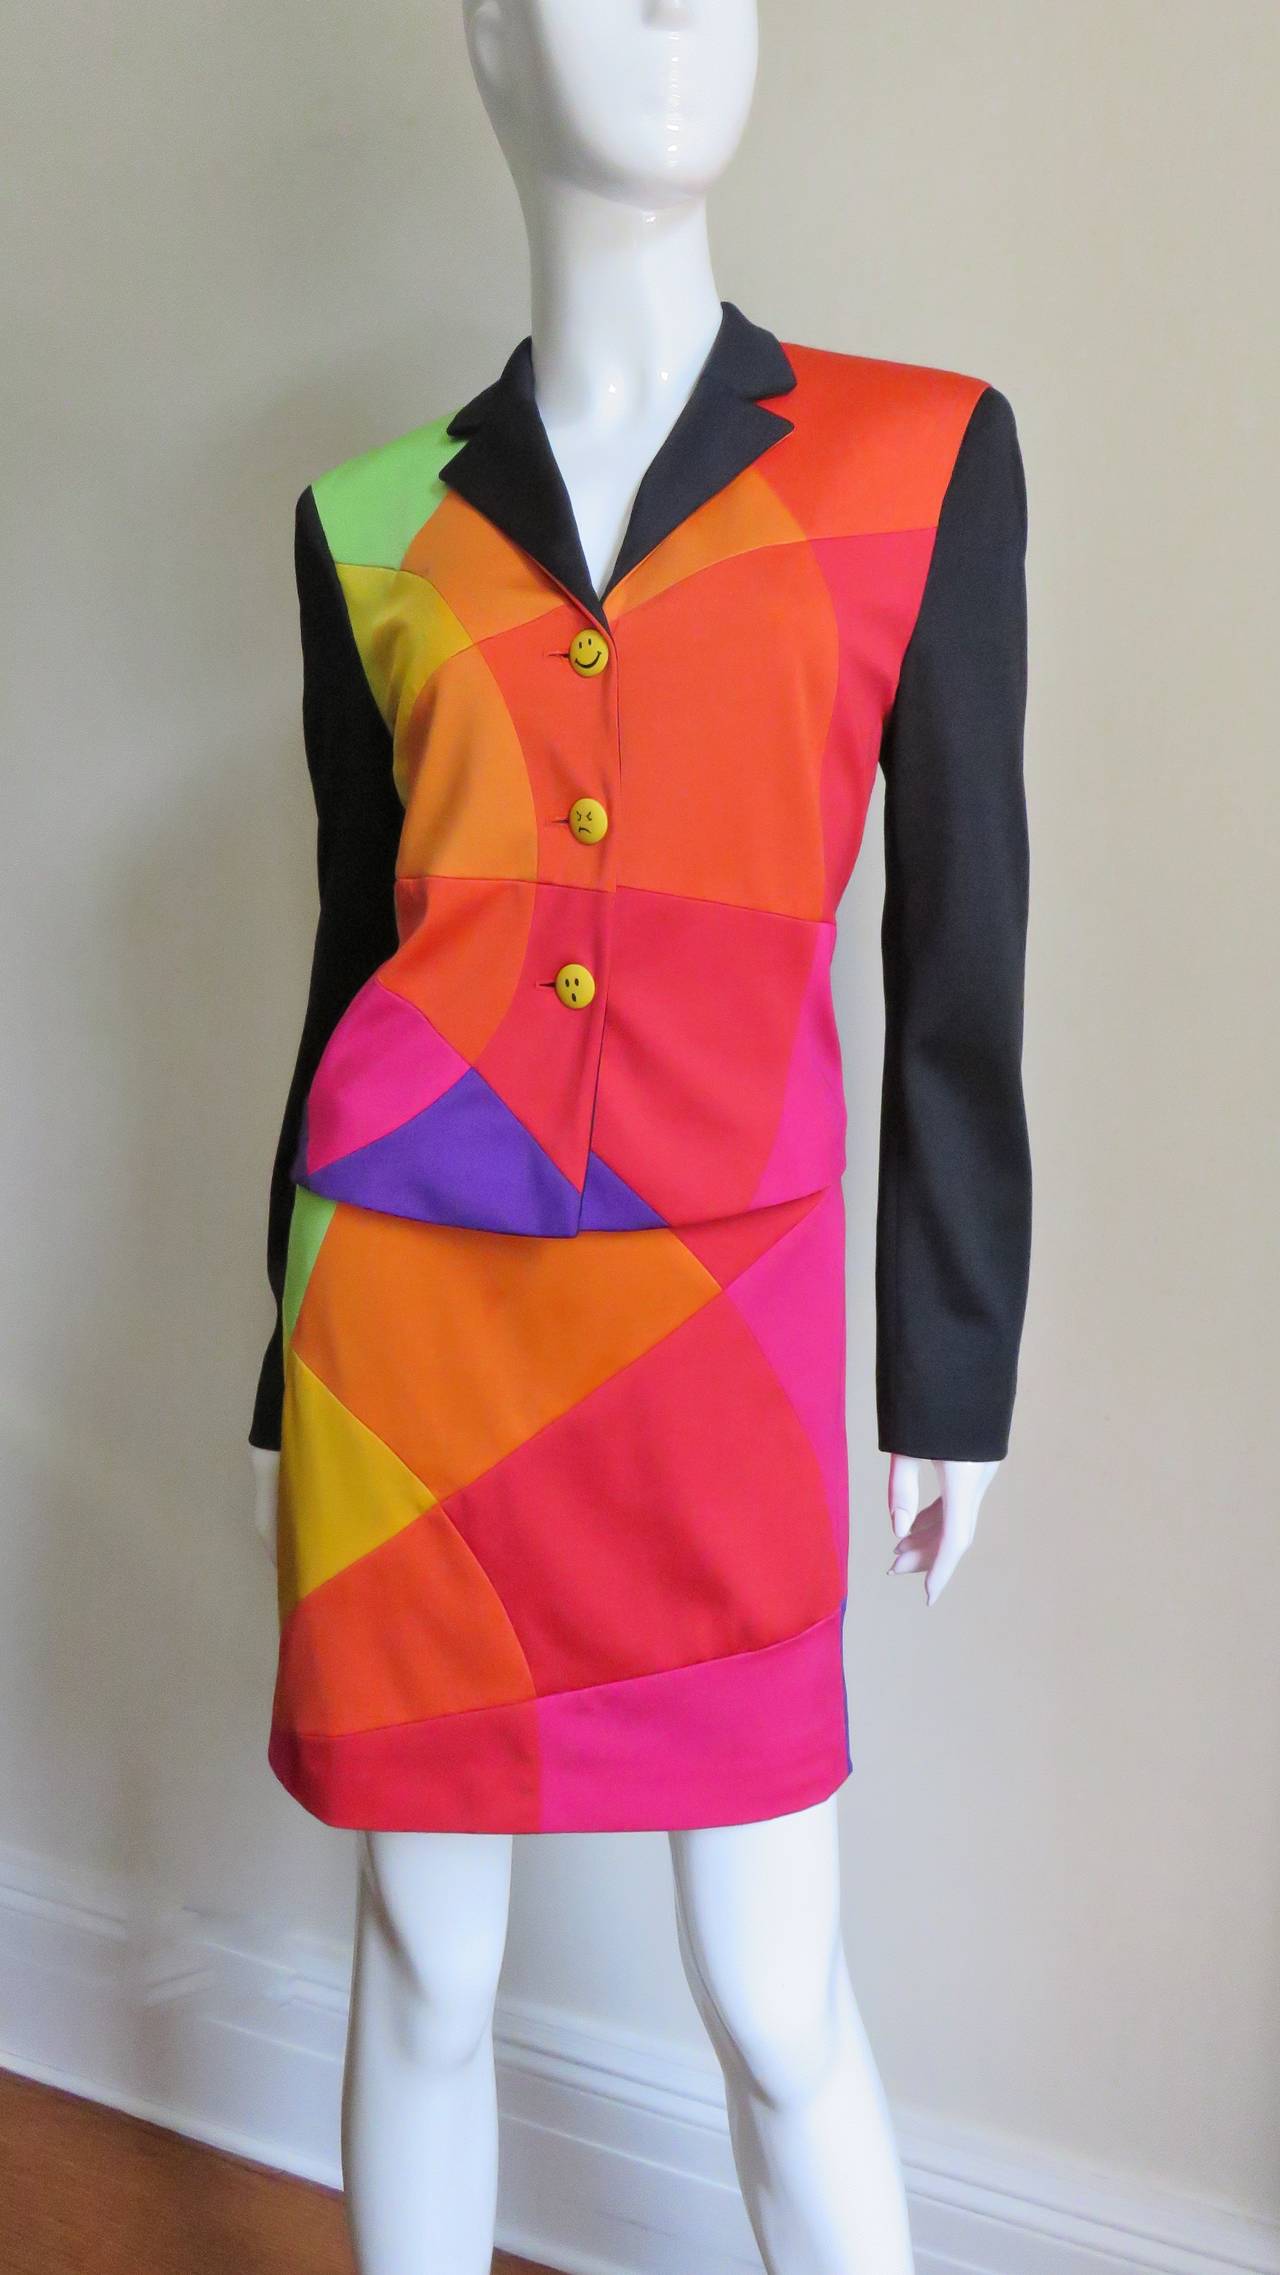 Moschino Color Block Skirt Suit with Emoji Buttons In Good Condition For Sale In Water Mill, NY